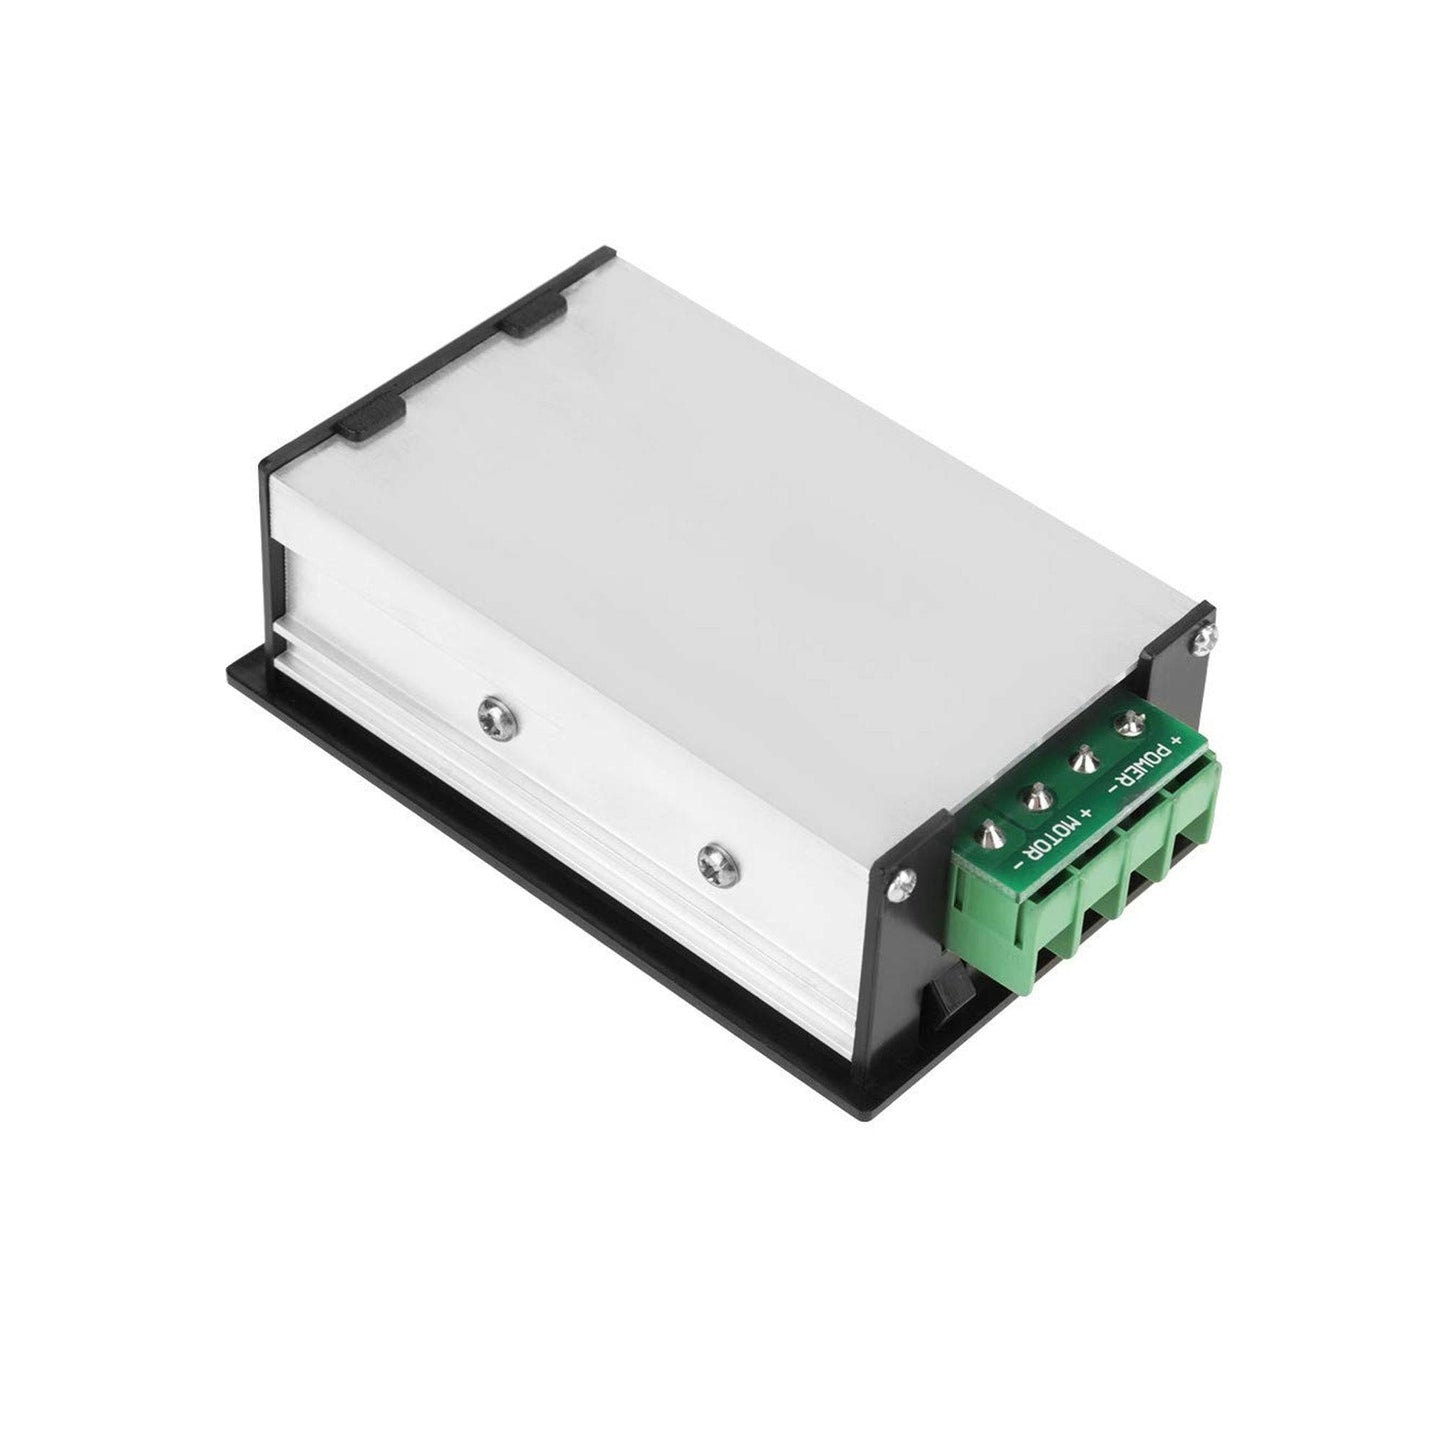 6-60V 30A Motor Speed Controller with Digital Display